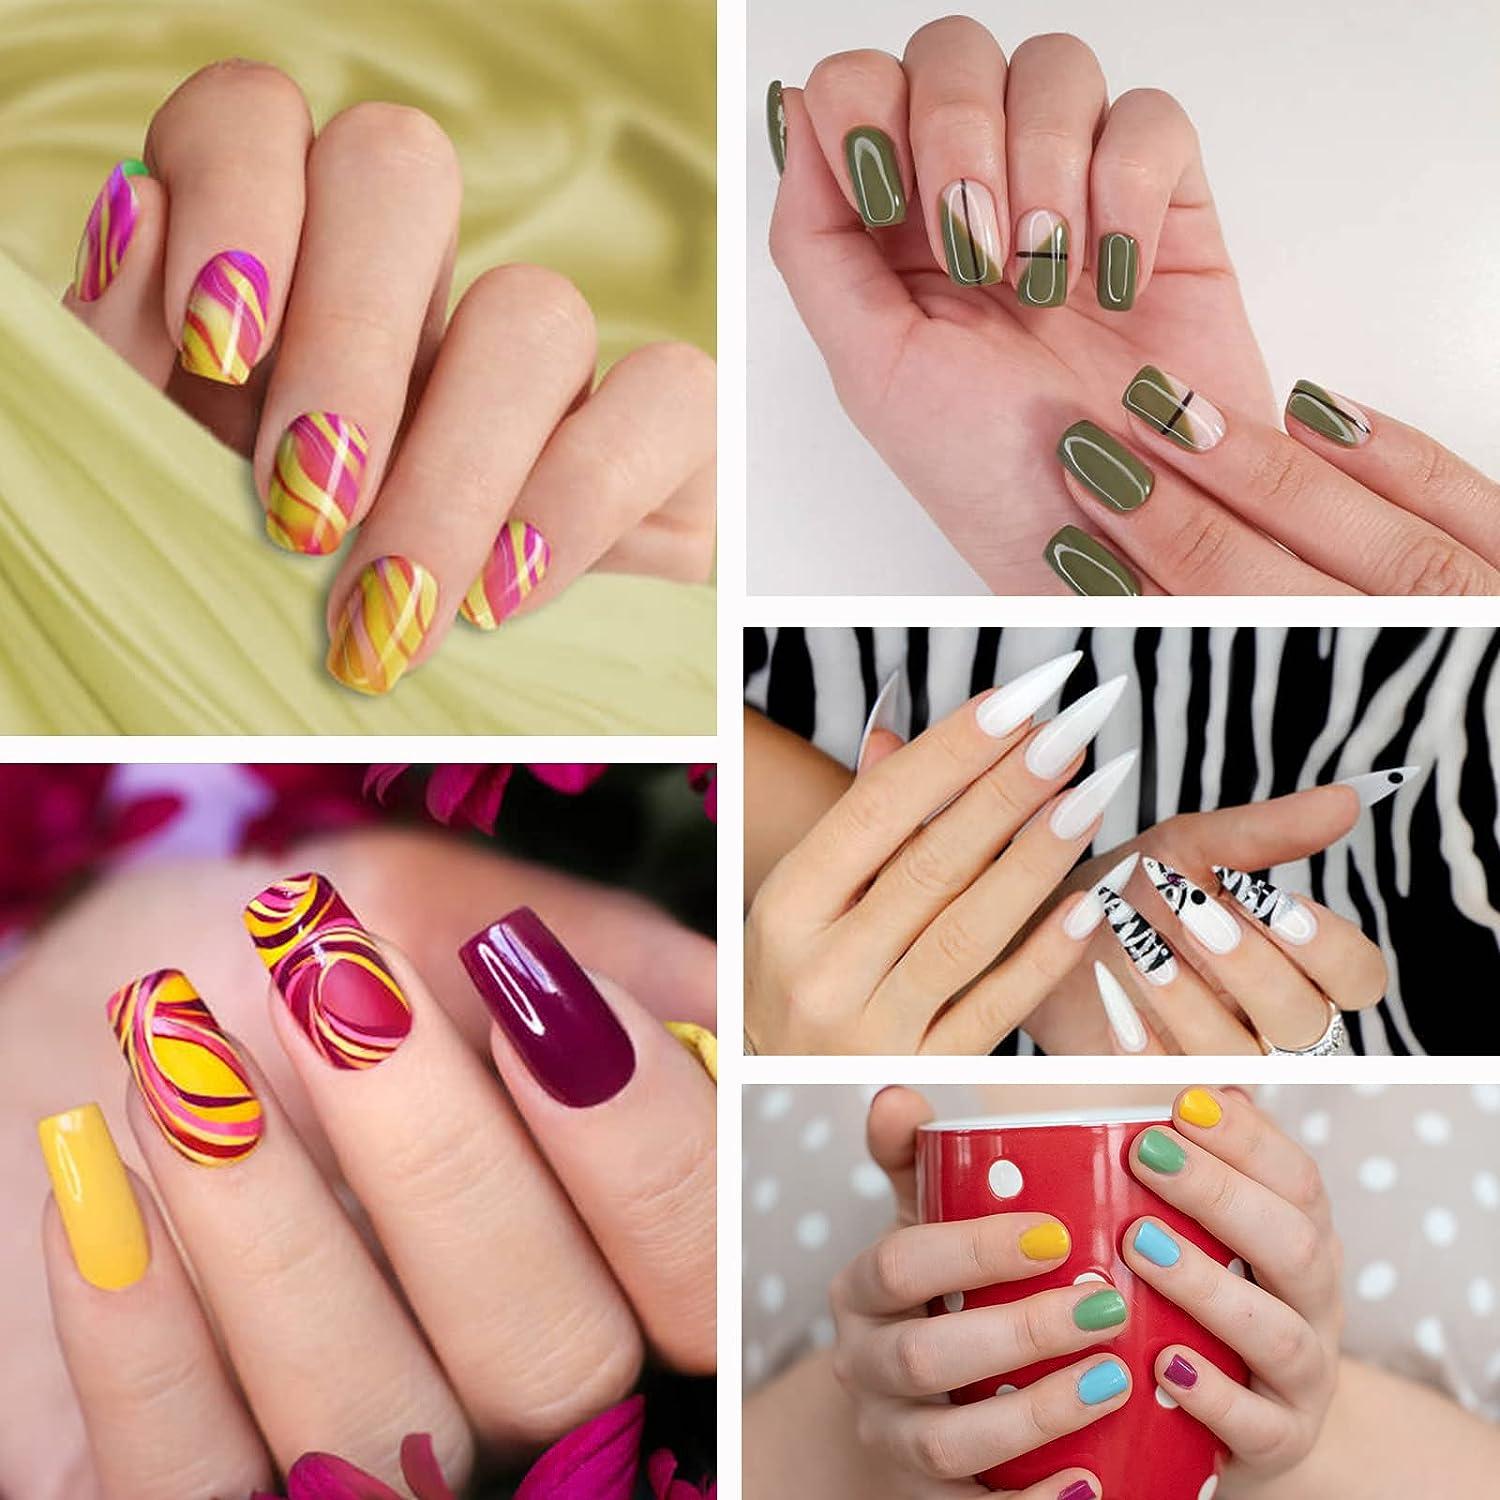 Nail art: best manicure designs, leading trends, how to achieve them